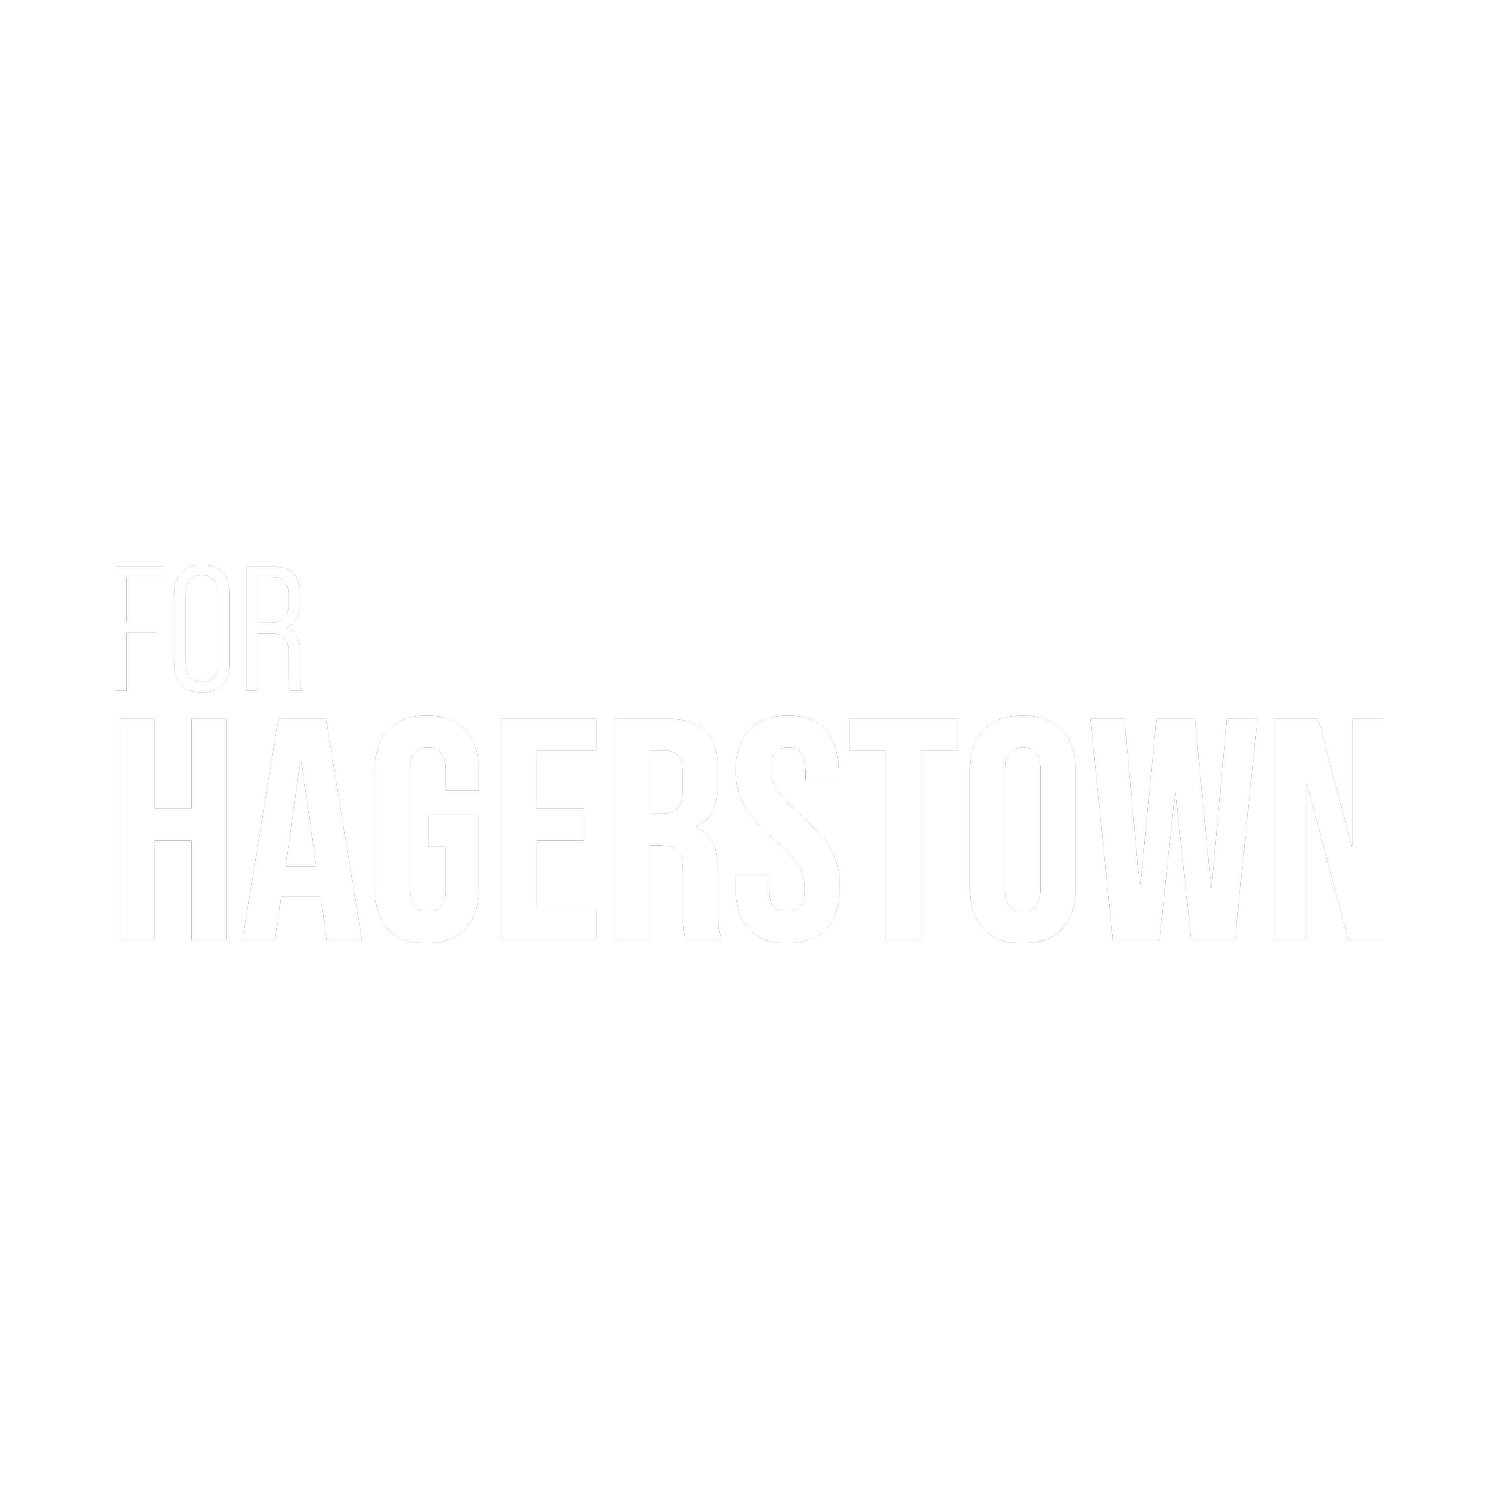 FOR HAGERSTOWN